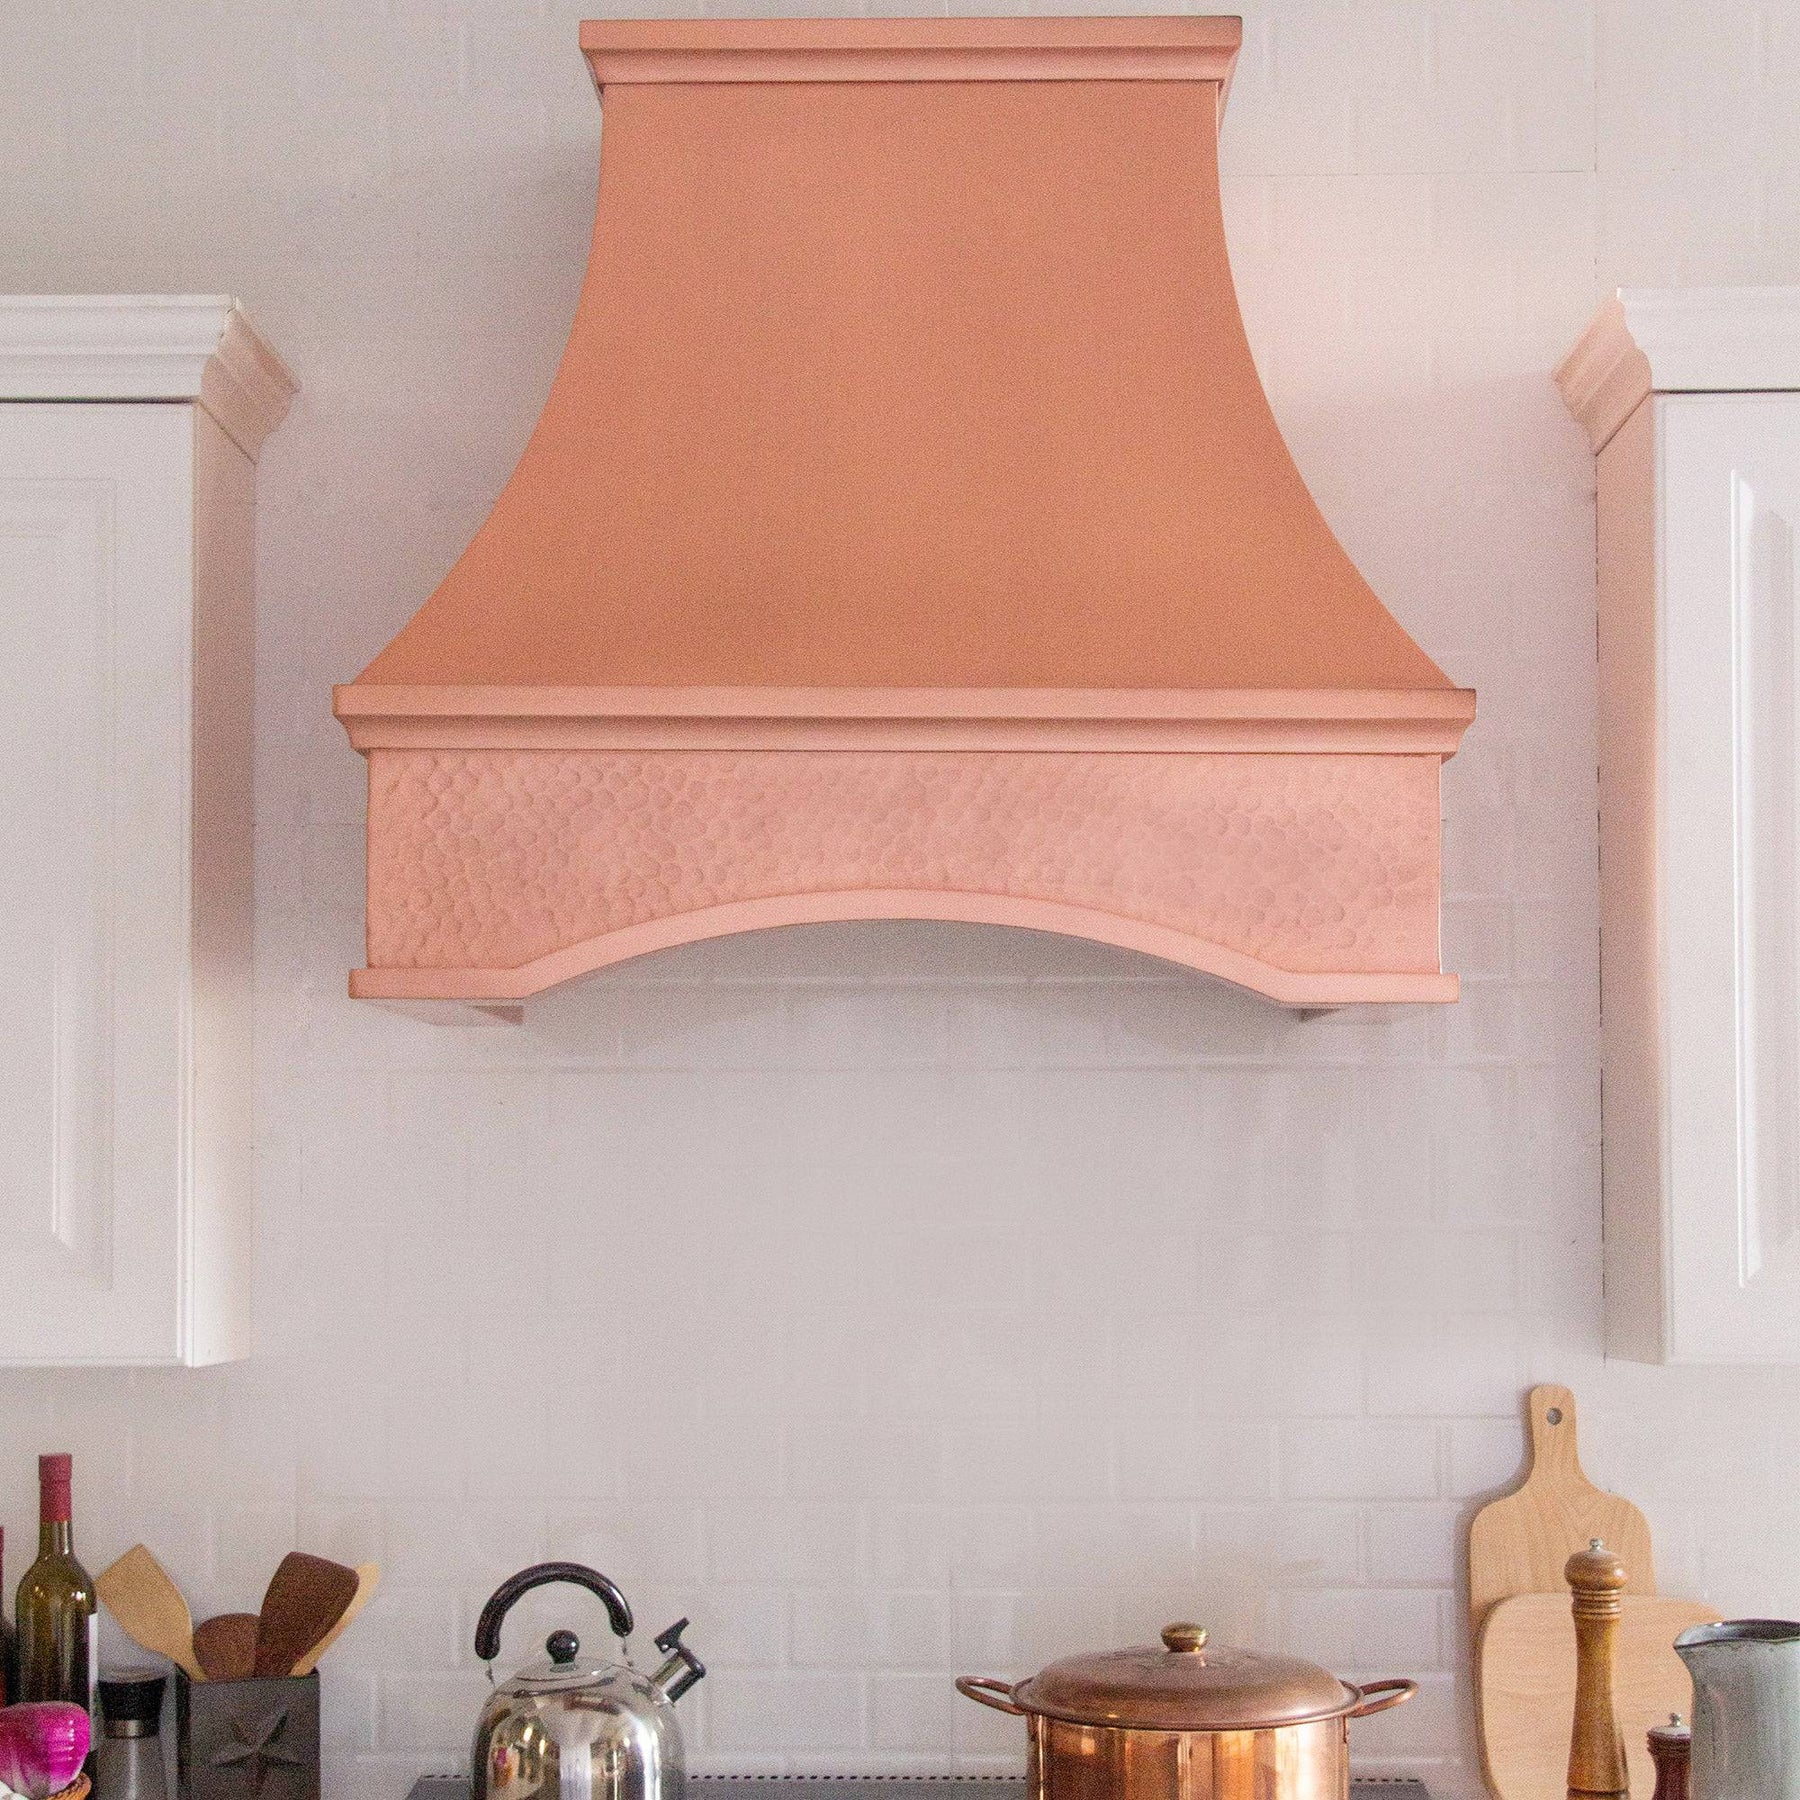 Fobest Handmade Bottom Arched Natural Copper Range Hood with Hammer Apron Texture FCP-76 - Copper Range Hood-Fobest Appliance